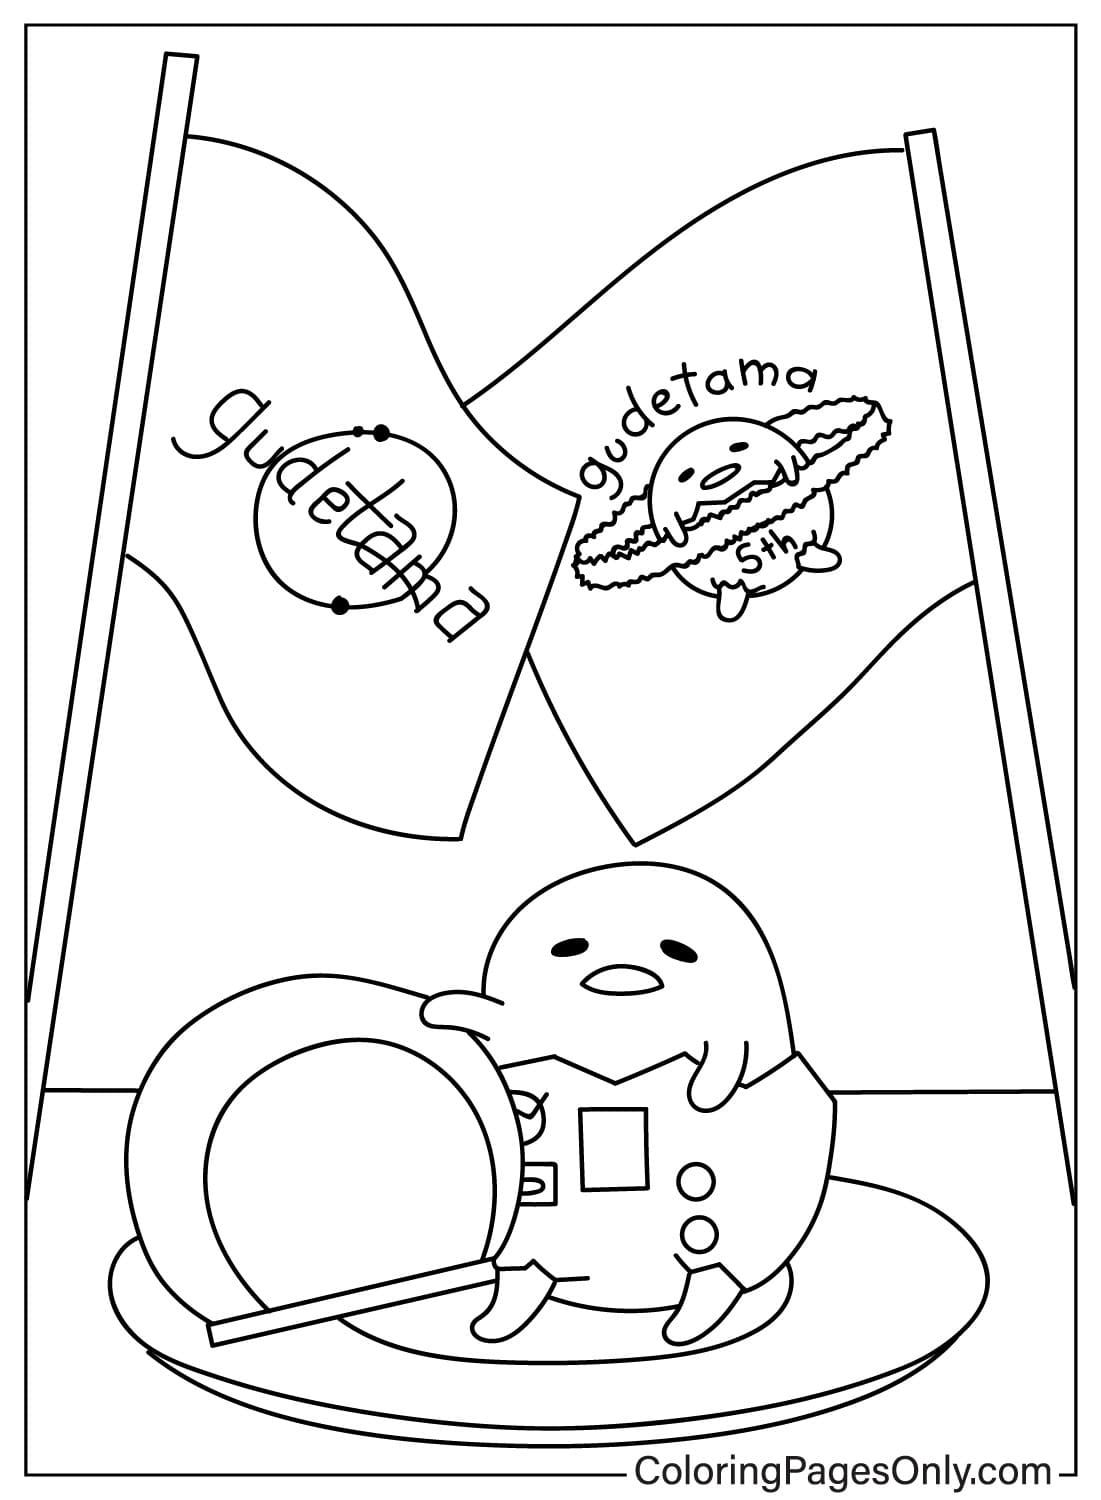 Gudetama Coloring Pages to for Kids from Gudetama